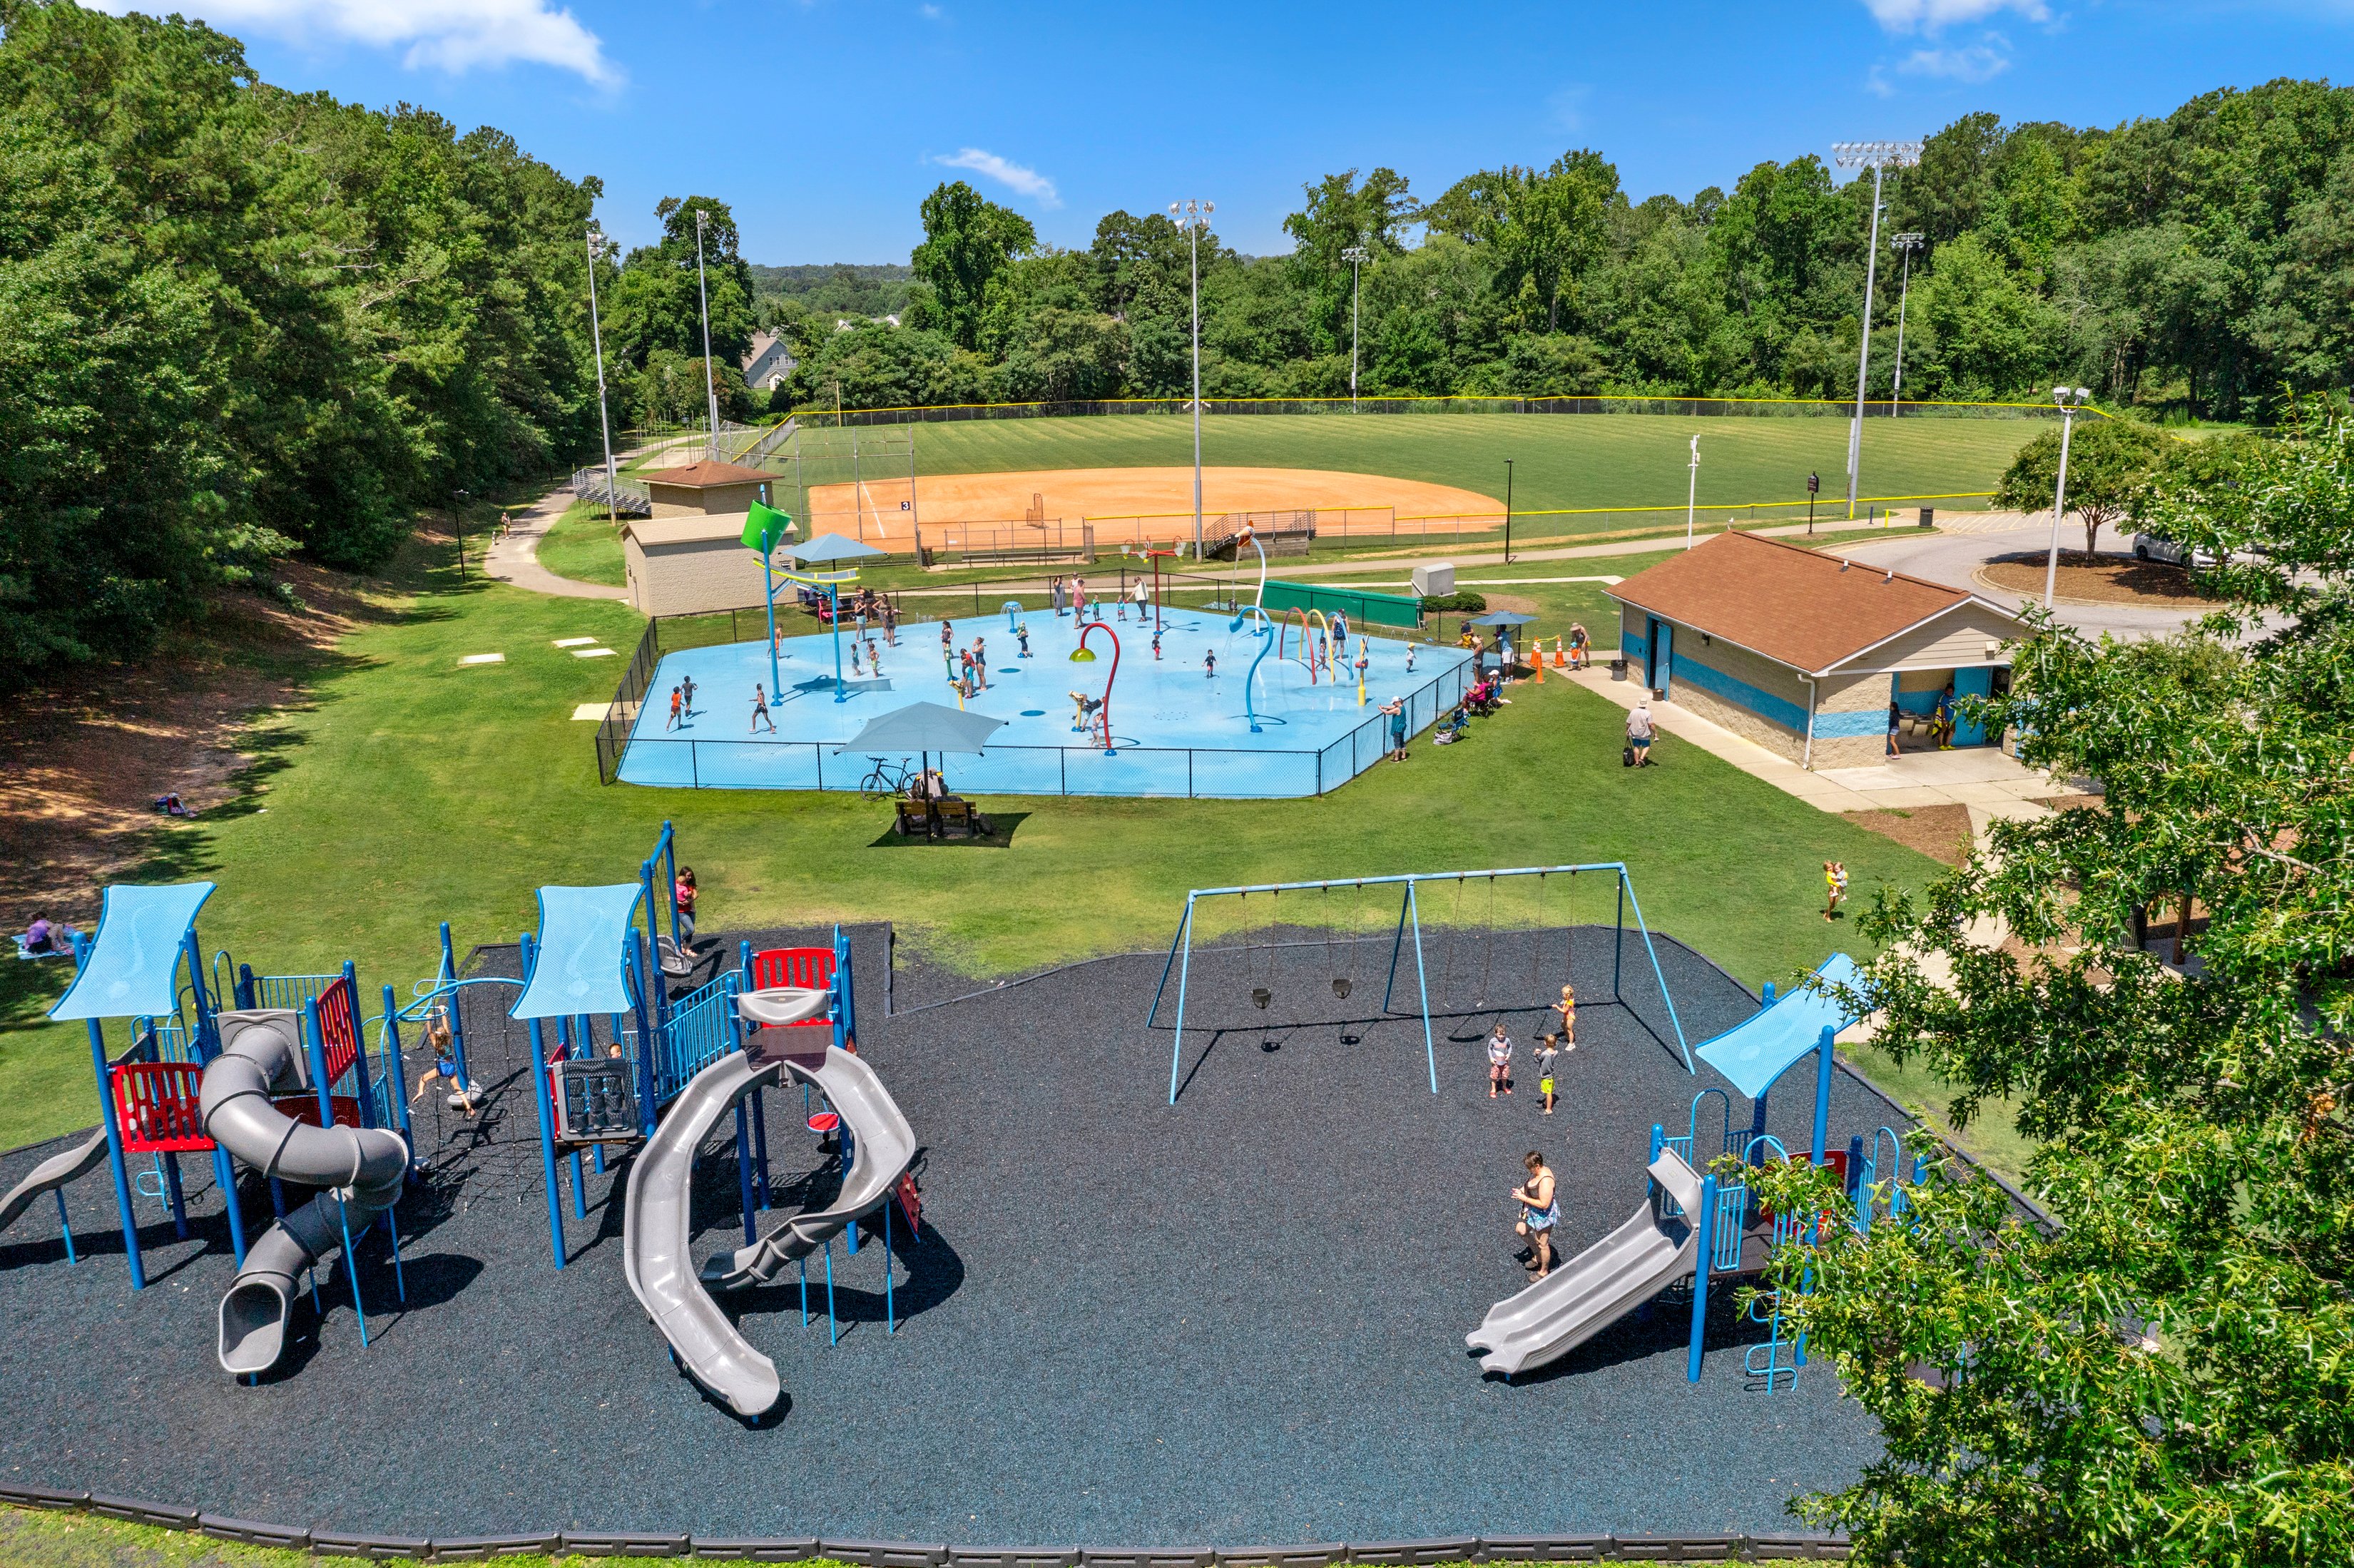 A 15-minute drive to Splash Pad Water Park